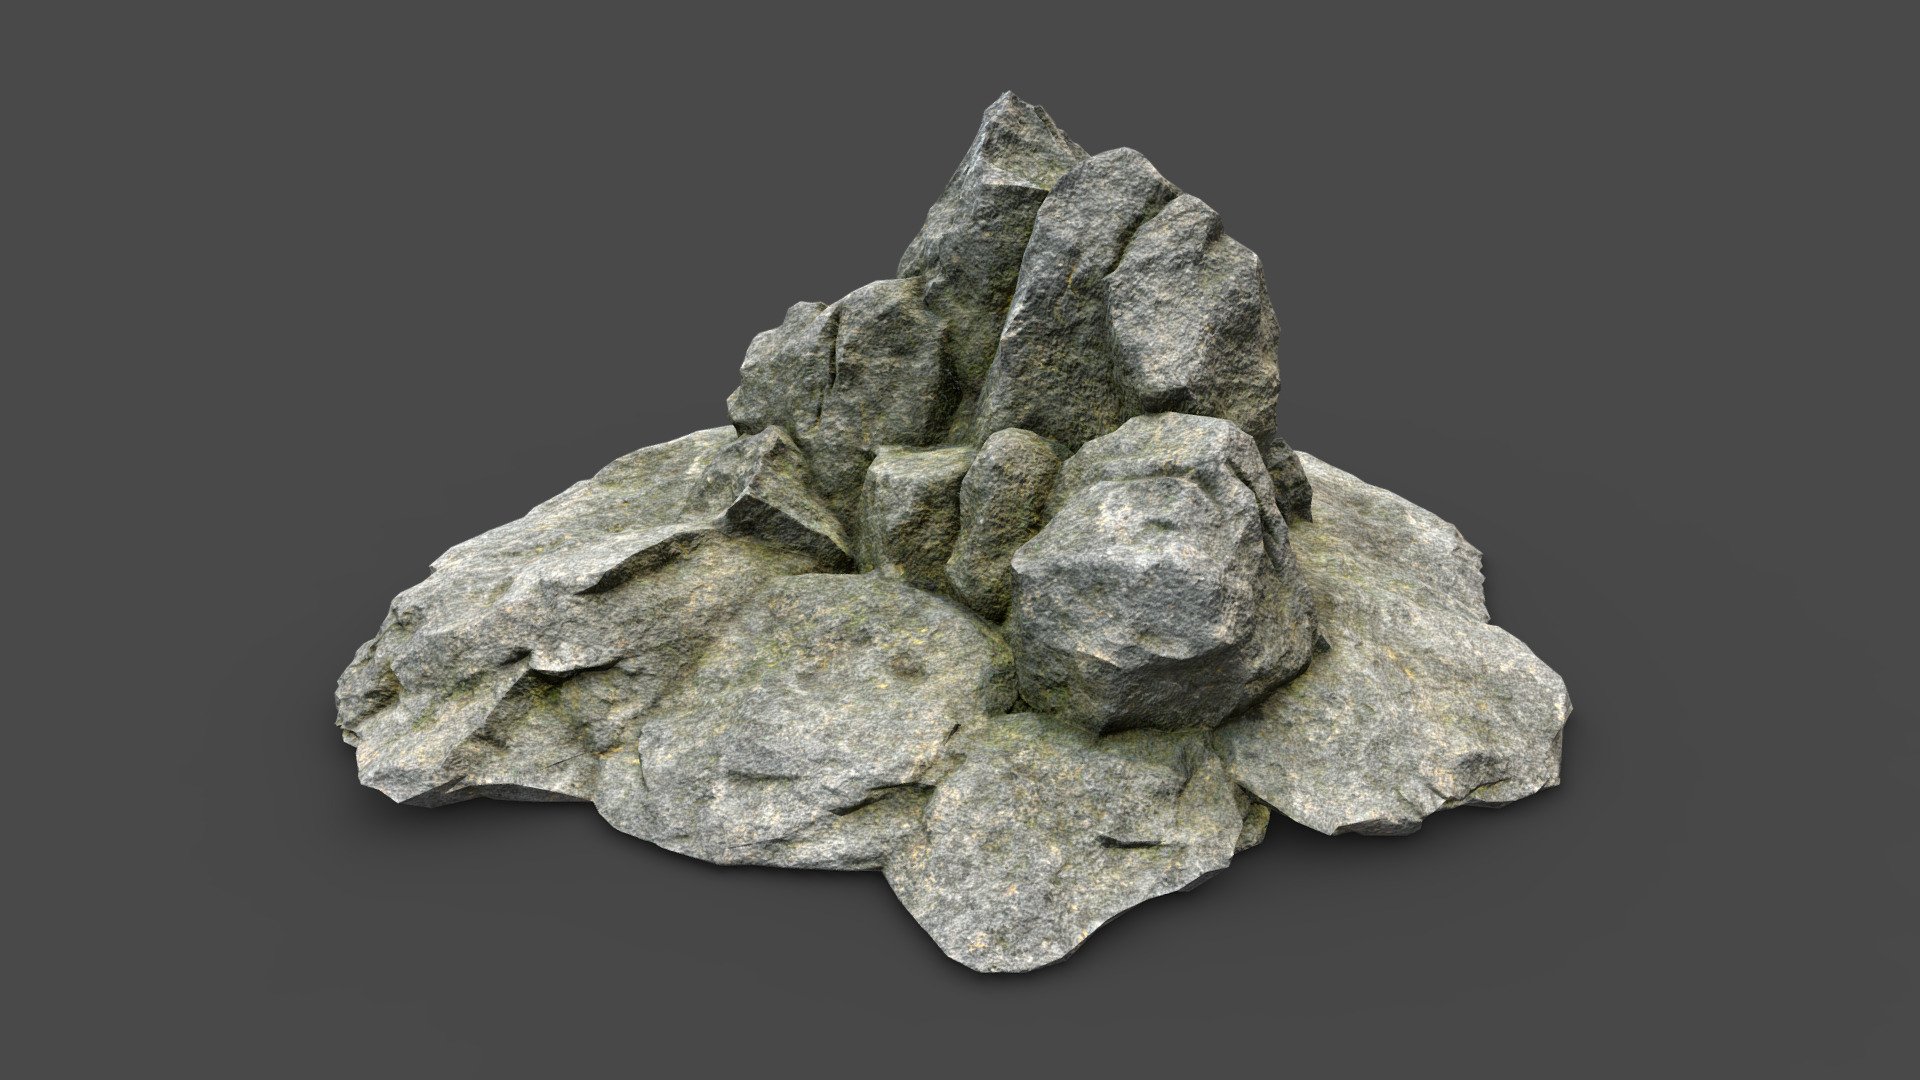 Rock 3_10 low poly

Topology: Tris

Polygon count: 8802

Vertices count: 4403

Textures: Diffuse, Normal, Specular, Glossiness, Curvature, Height, Ambient Occlusion ( all in 4k resolution)

UV mapped with non-overlapping

All files are zipped in one folder. Contains 3 file formats obj, ma &amp; fbx

Useful for games, renders, background scenes and other graphical projects 3d model